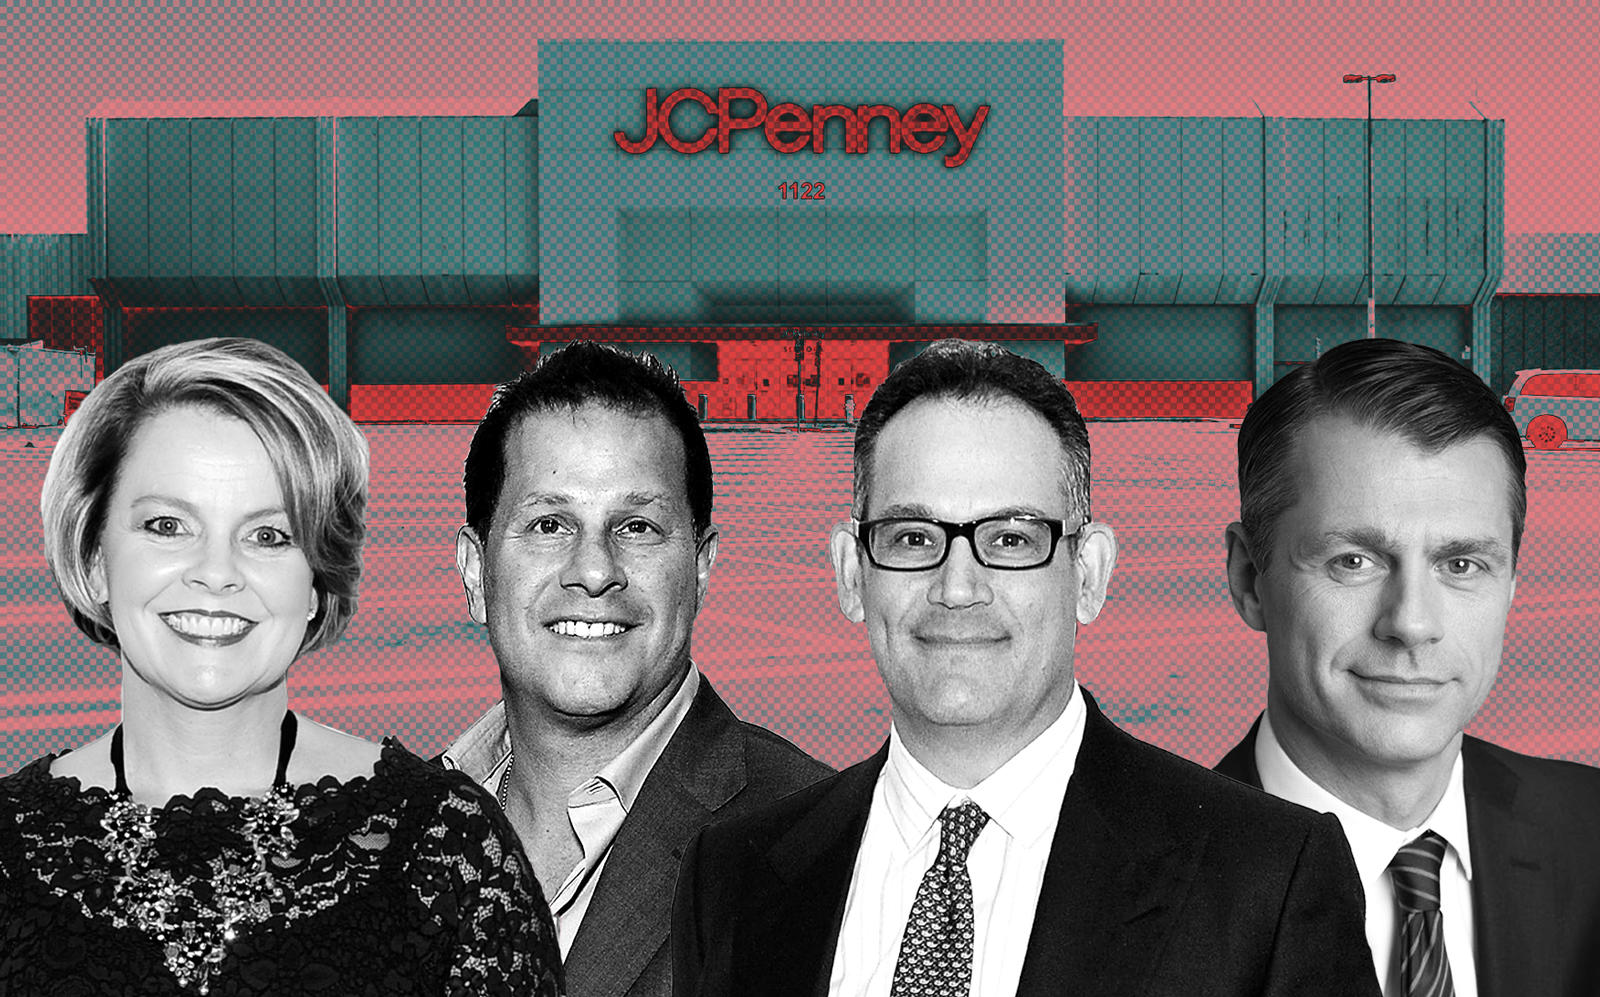 From left: J.C. Penney CEO Jill Soltau, Authentic Brands Group CEO Jamie Salter, Simon Property Group CEO David Simon, and Brookfield Property Partners CEO Brian Kingston (Getty)